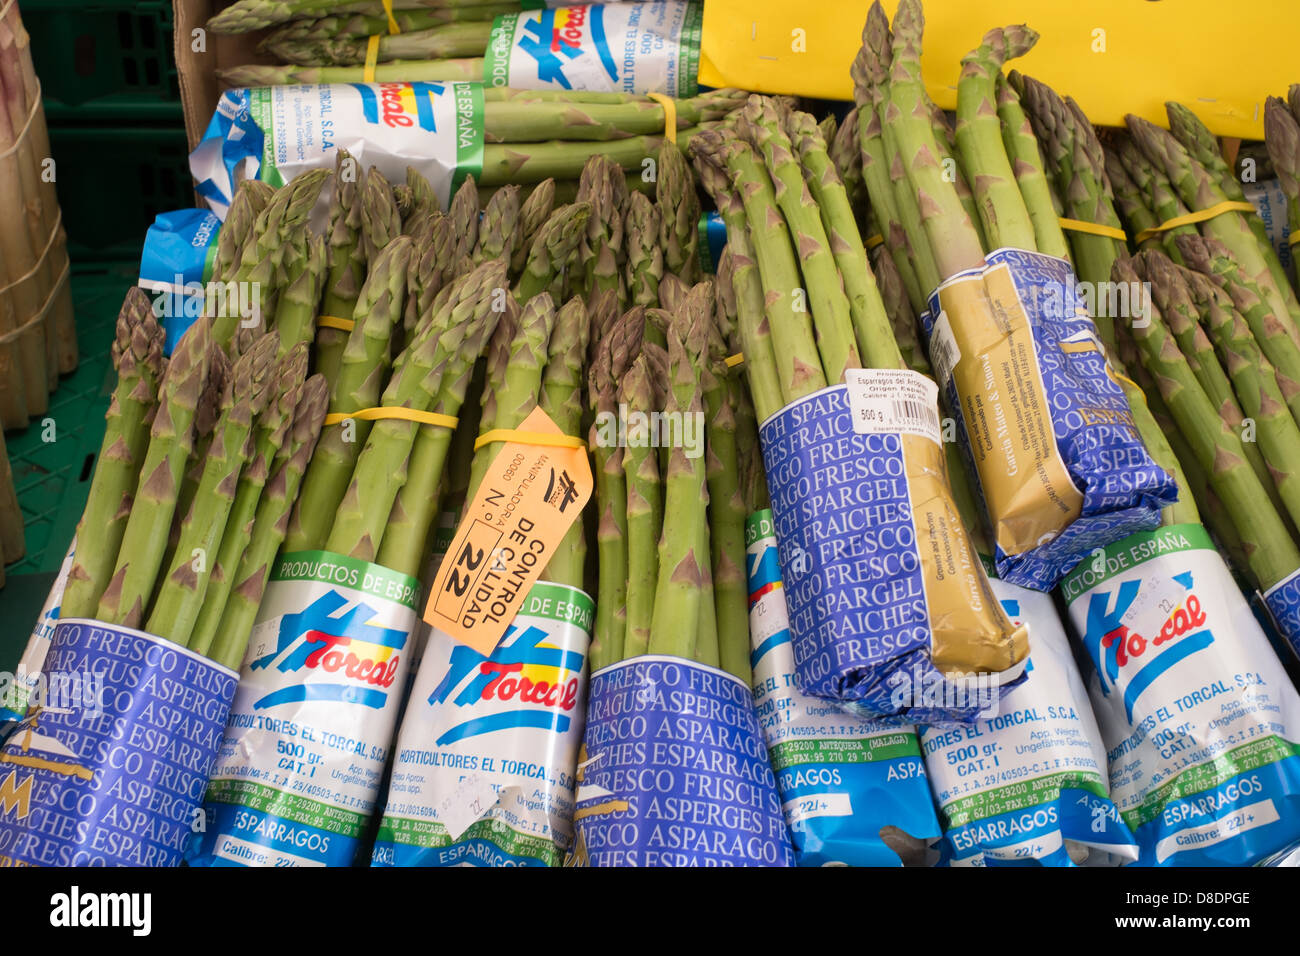 Vegetables at the market in Rue Mouffetard Paris France Asparagus Stock Photo